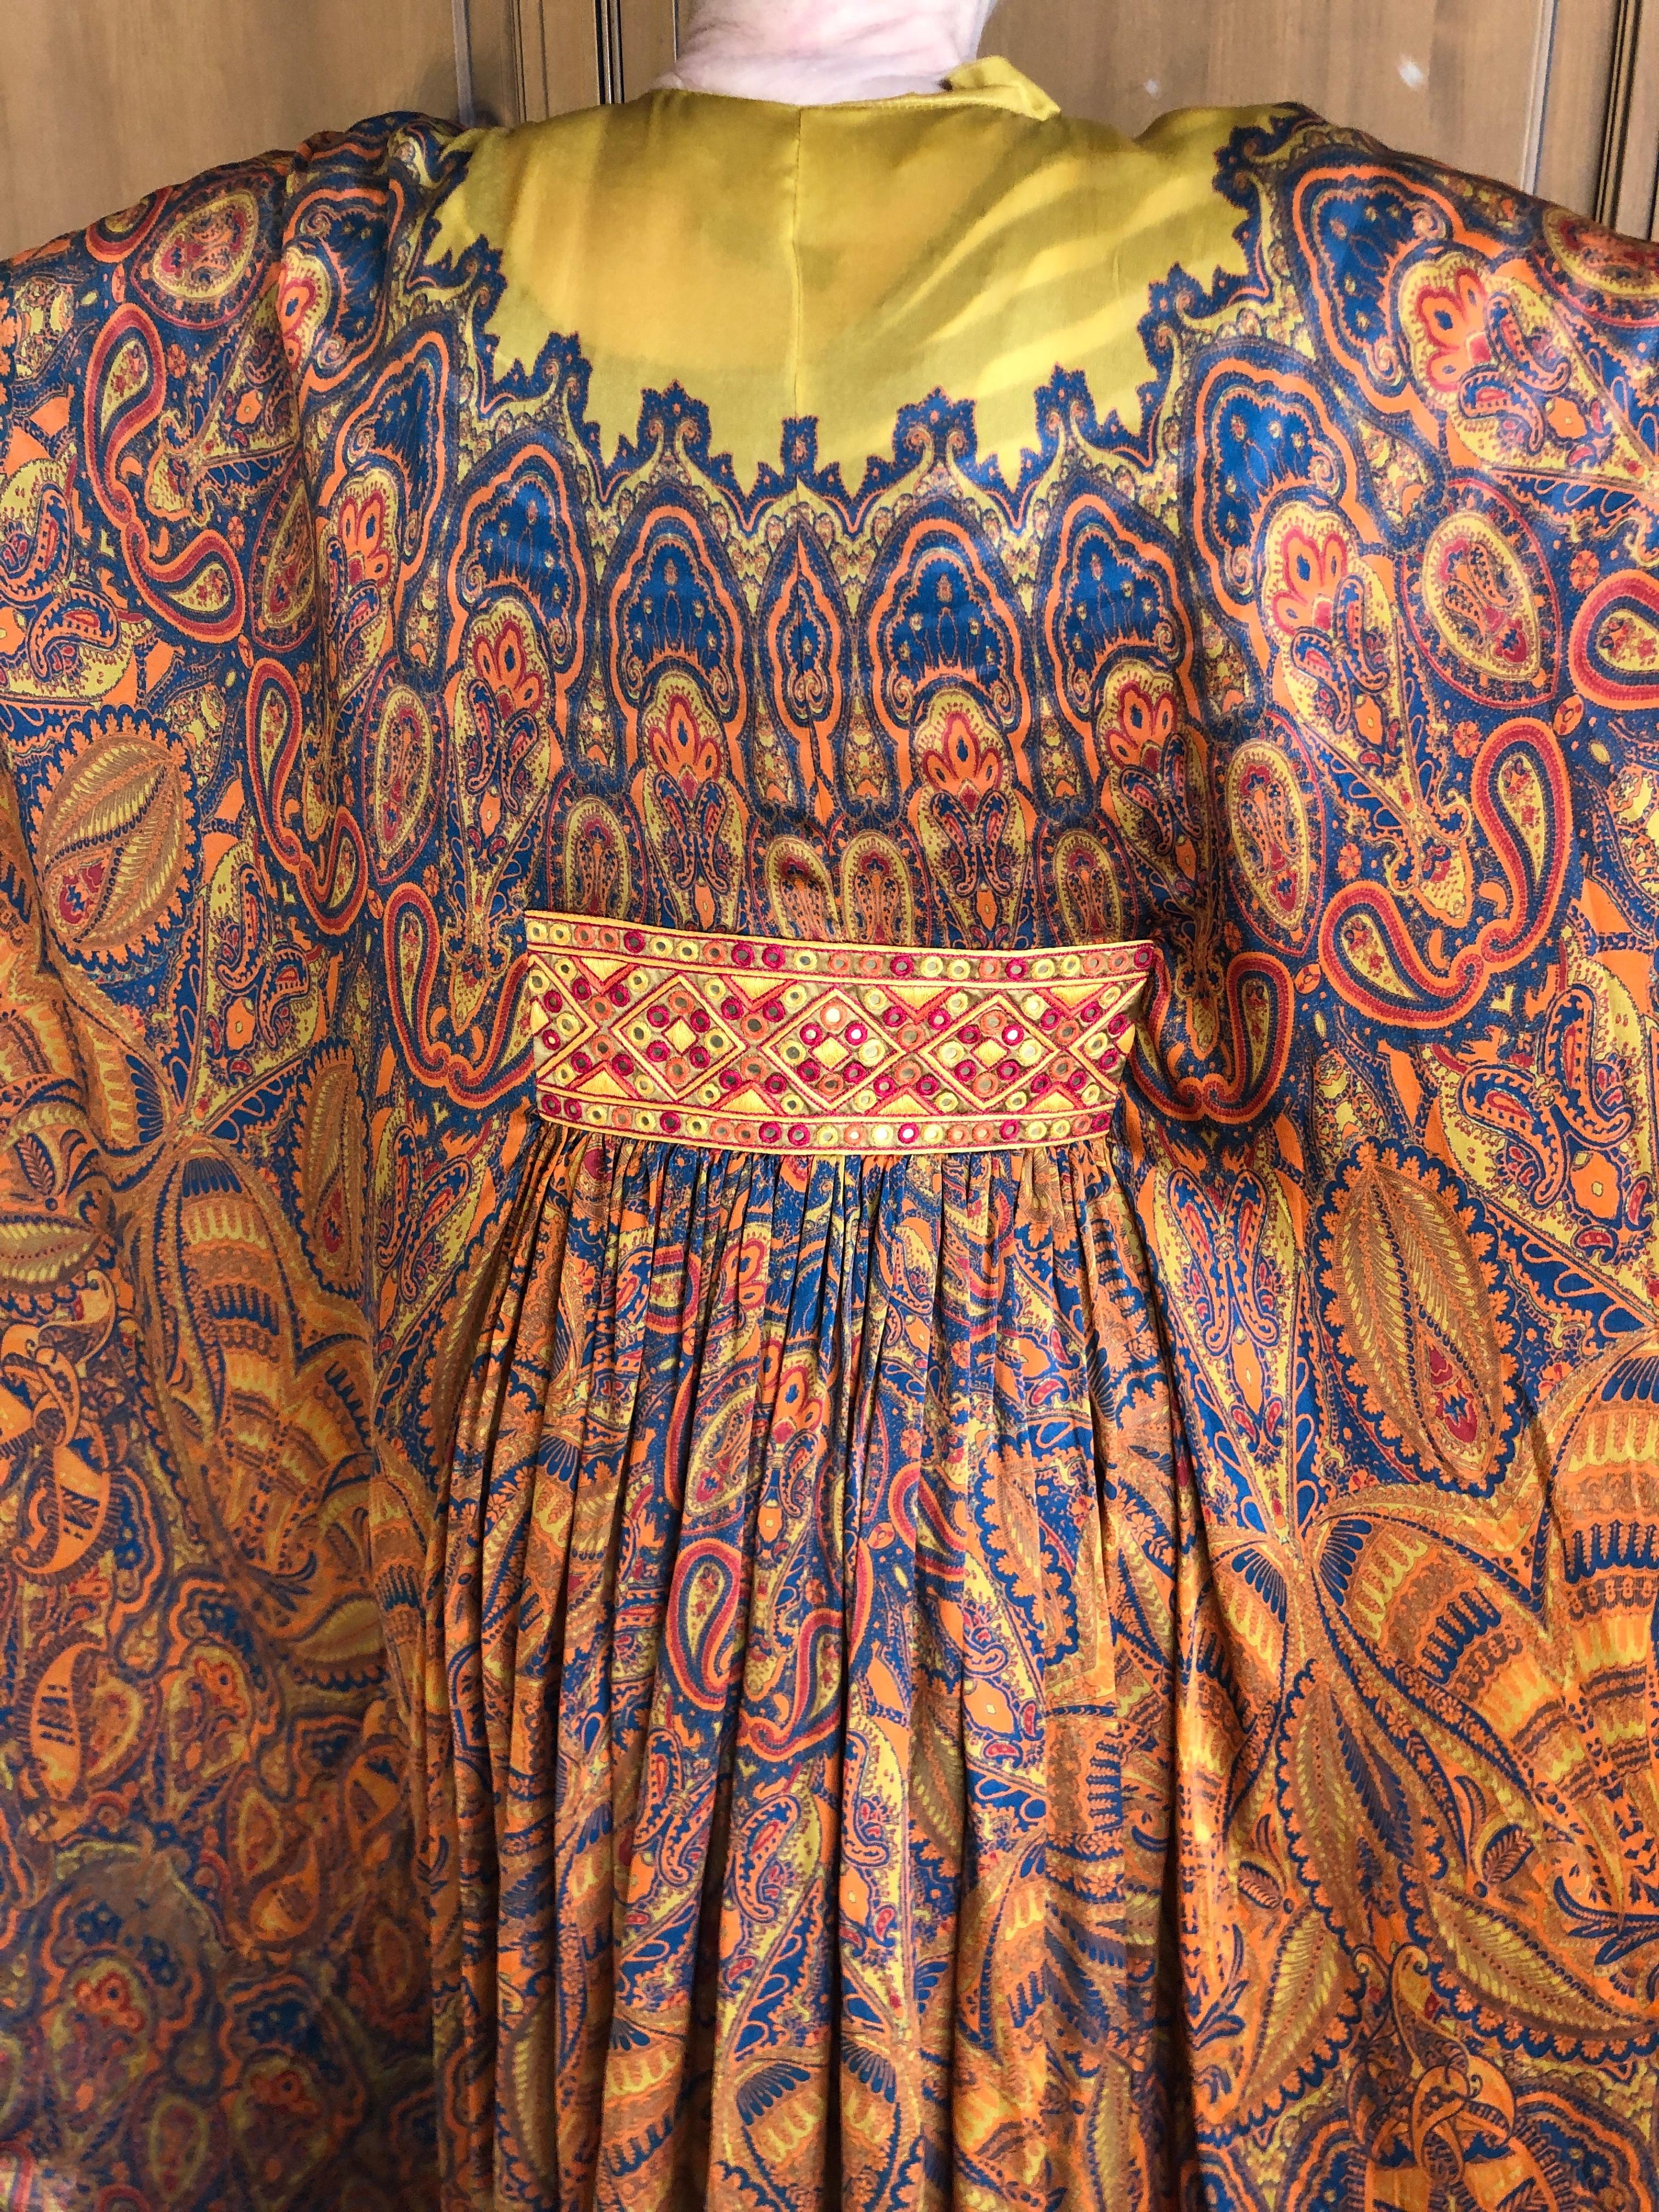 Alexander McQueen Spring 2011 Embellished Paisley Silk Caftan New Tags In New Condition For Sale In Cloverdale, CA